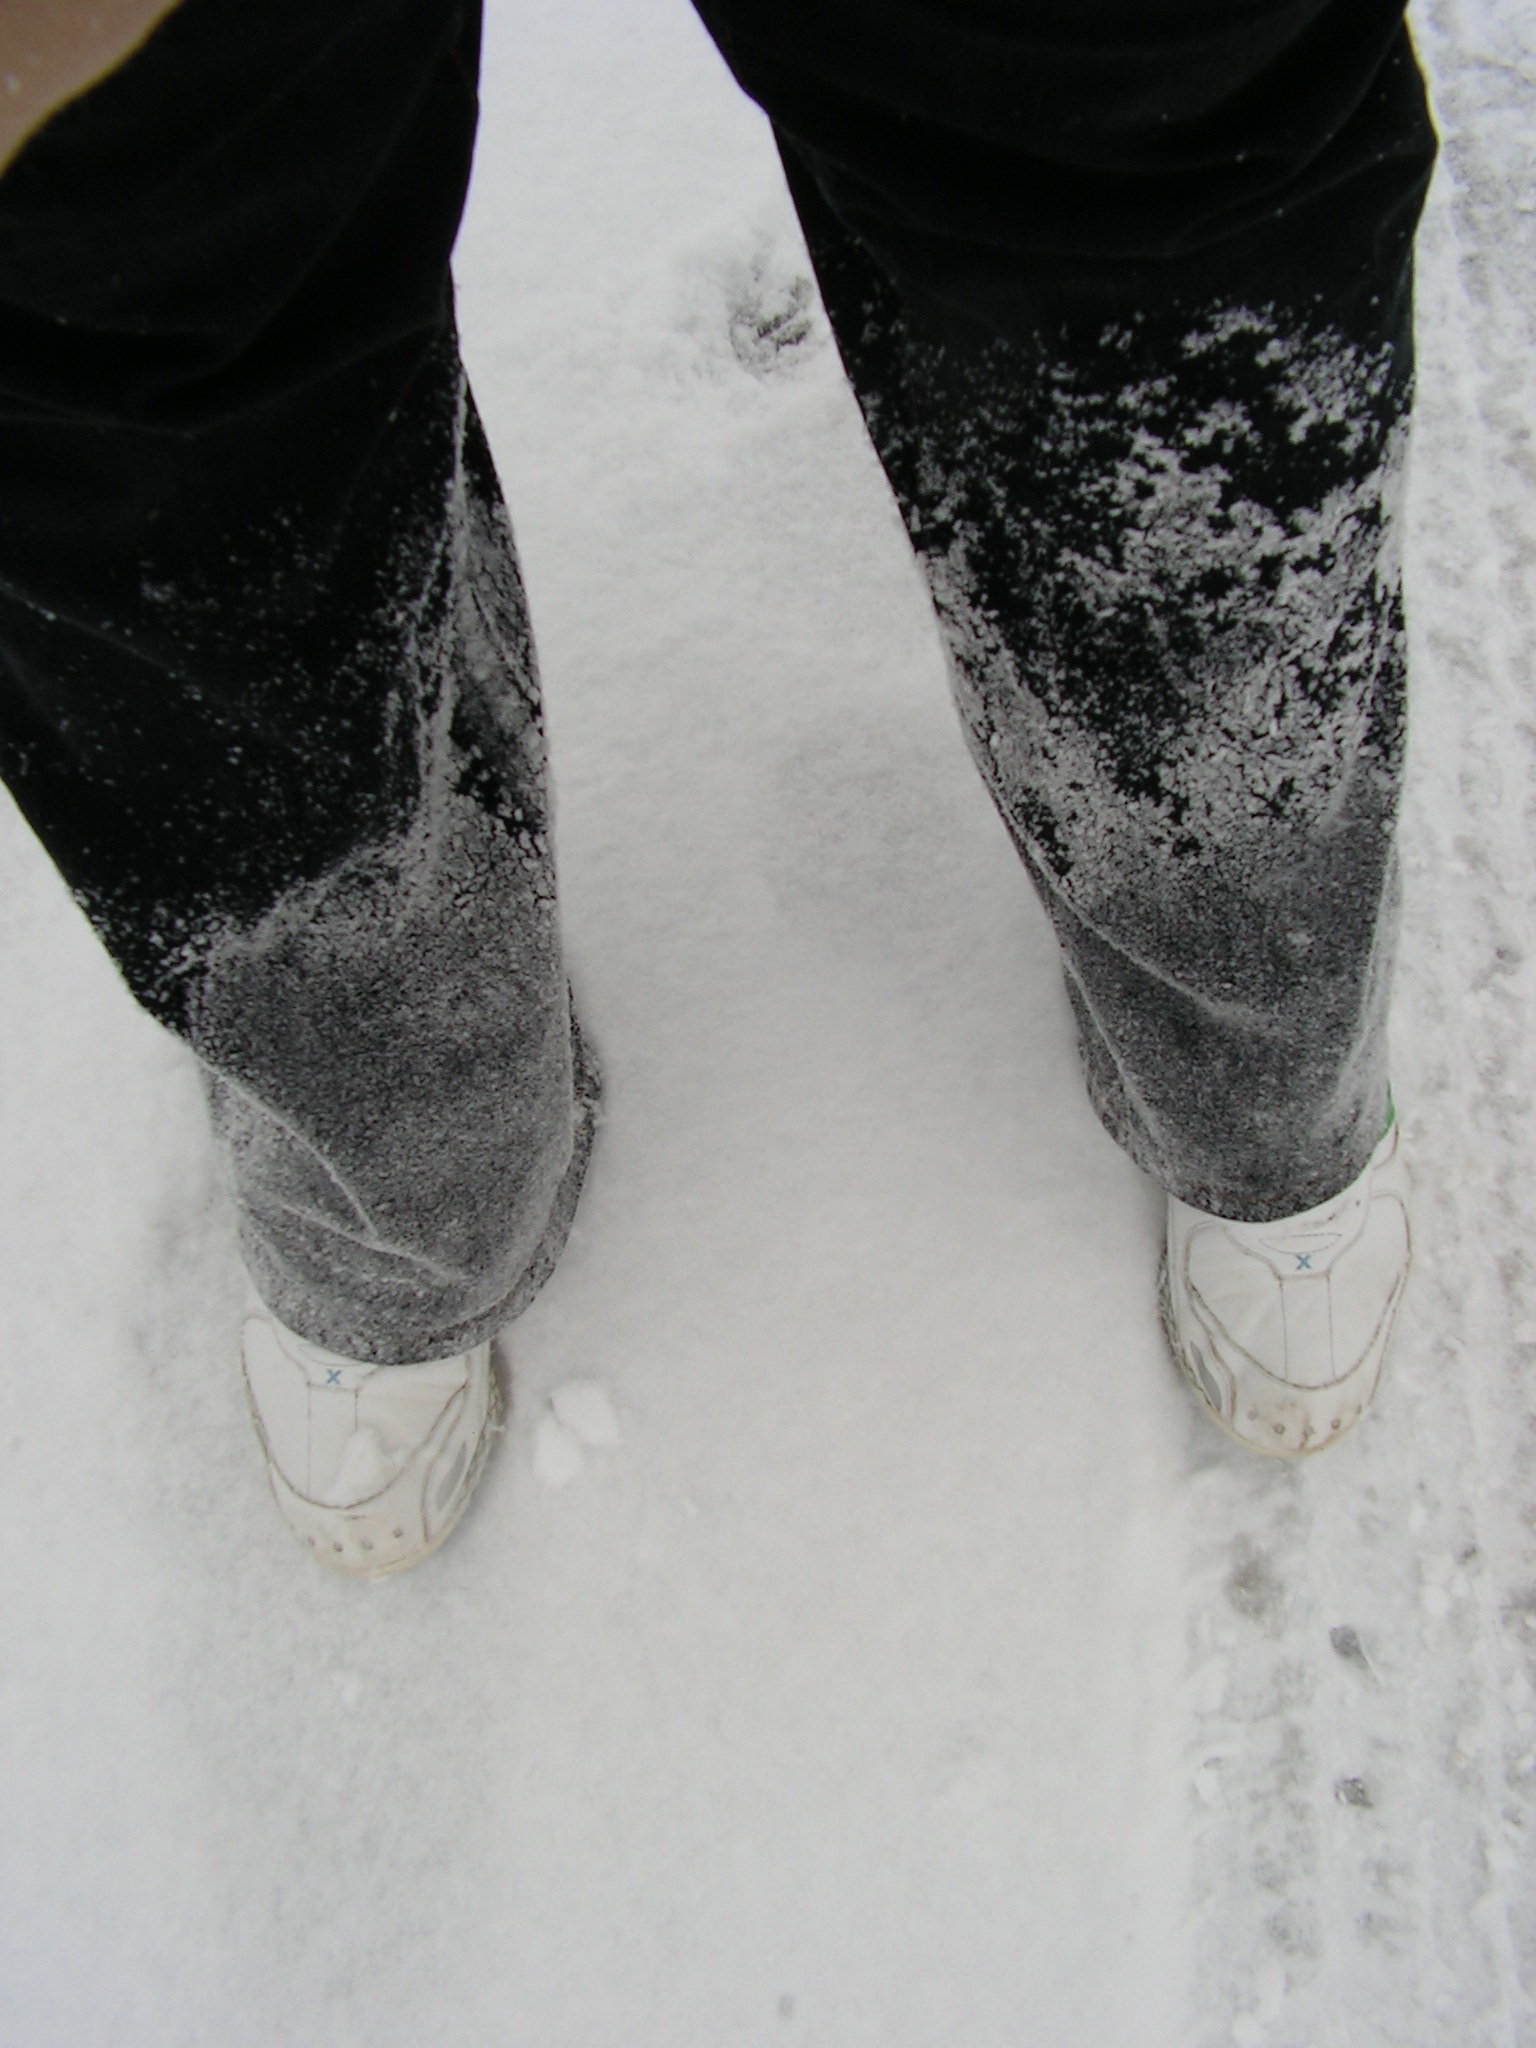 How to make snow boots (without the snow boots)